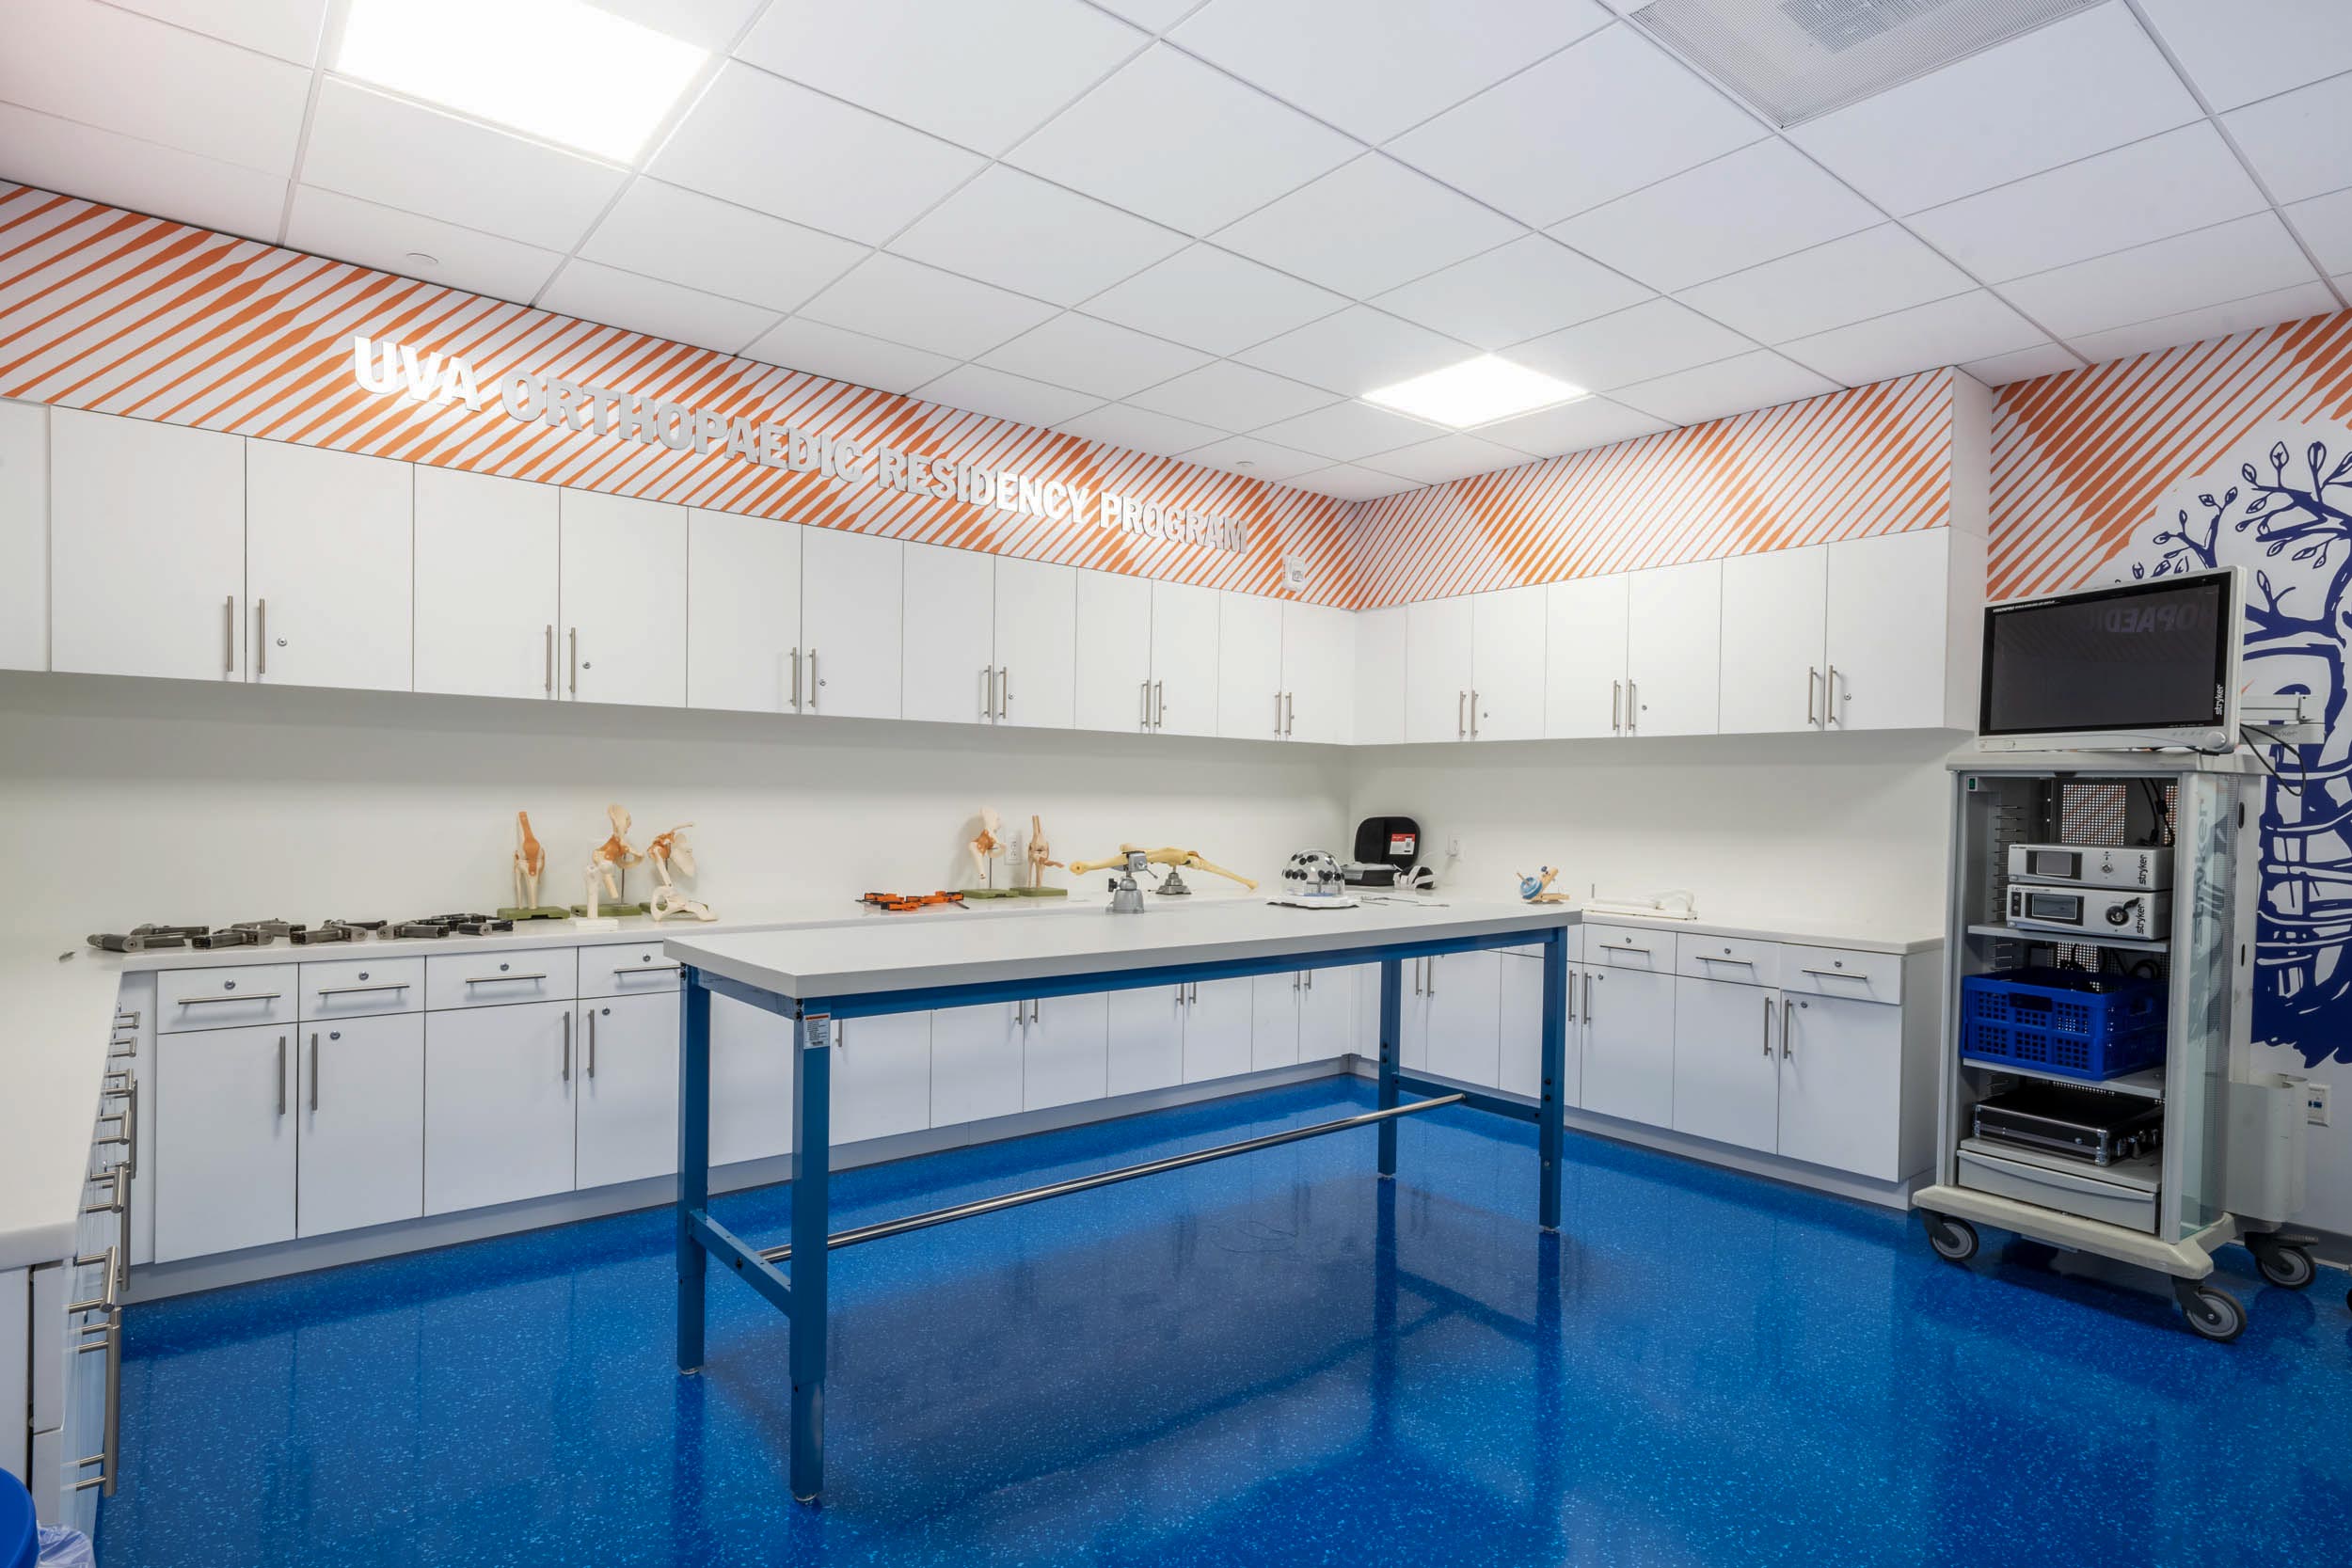 an image of the new bioskills lab shows sleek counters and cabinets